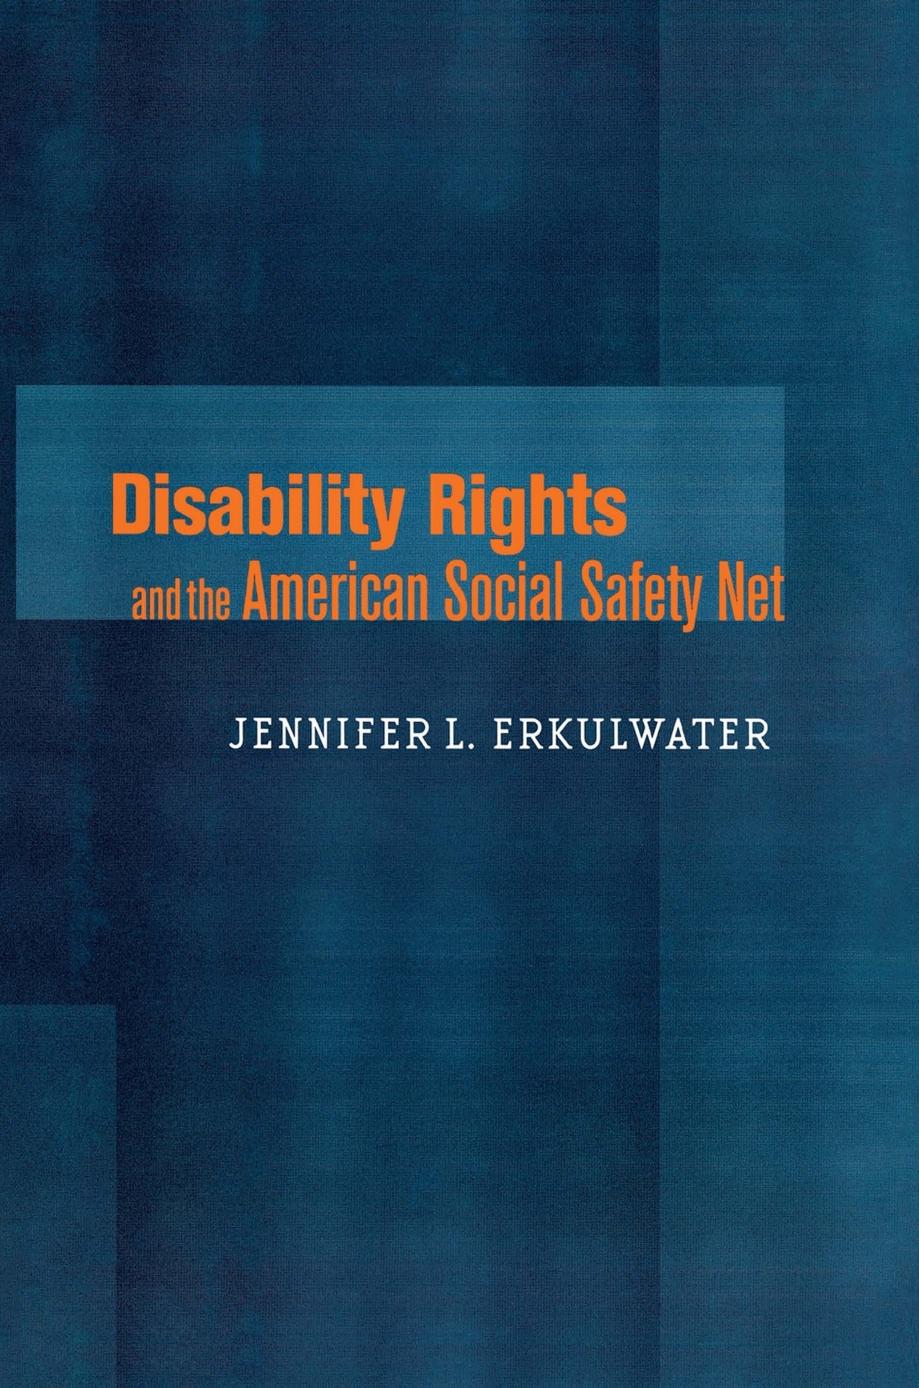 Disability Rights and the American Social Safety Net by Jennifer L. Erkulwater